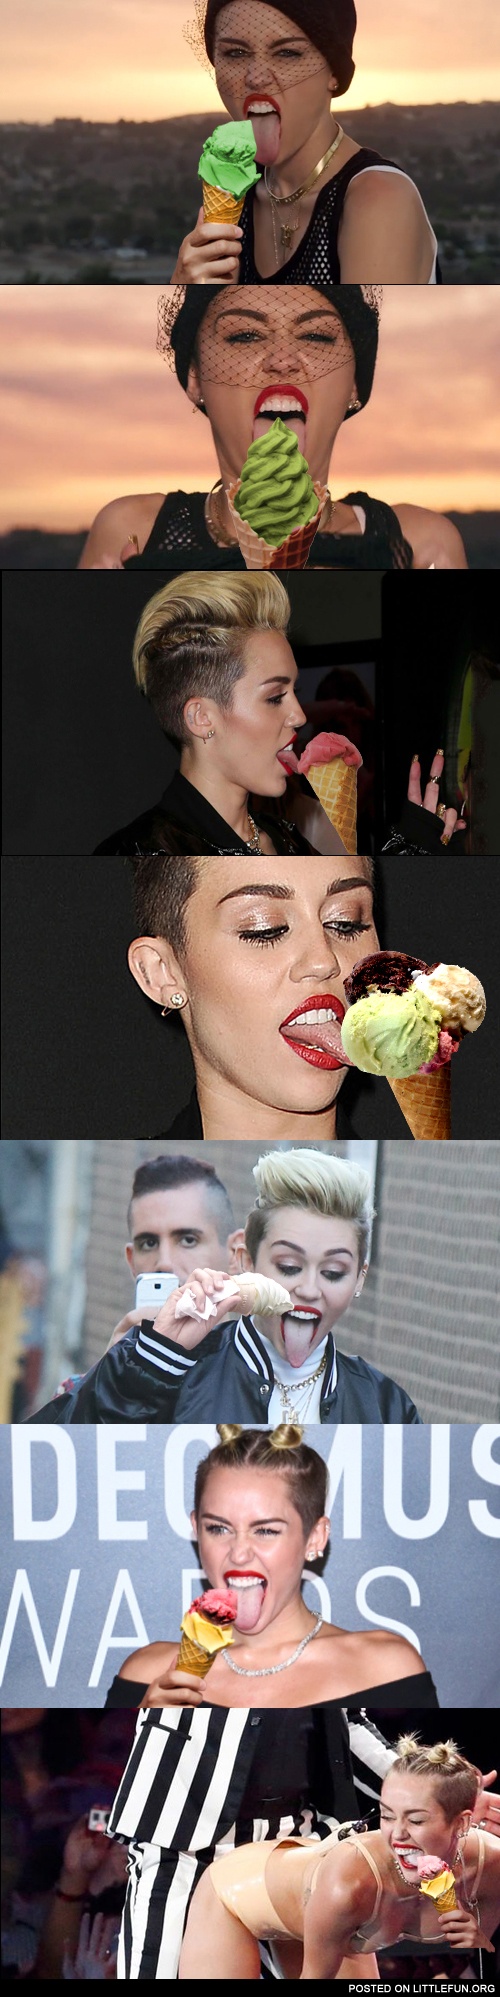 Miley Cyrus licking the ice cream